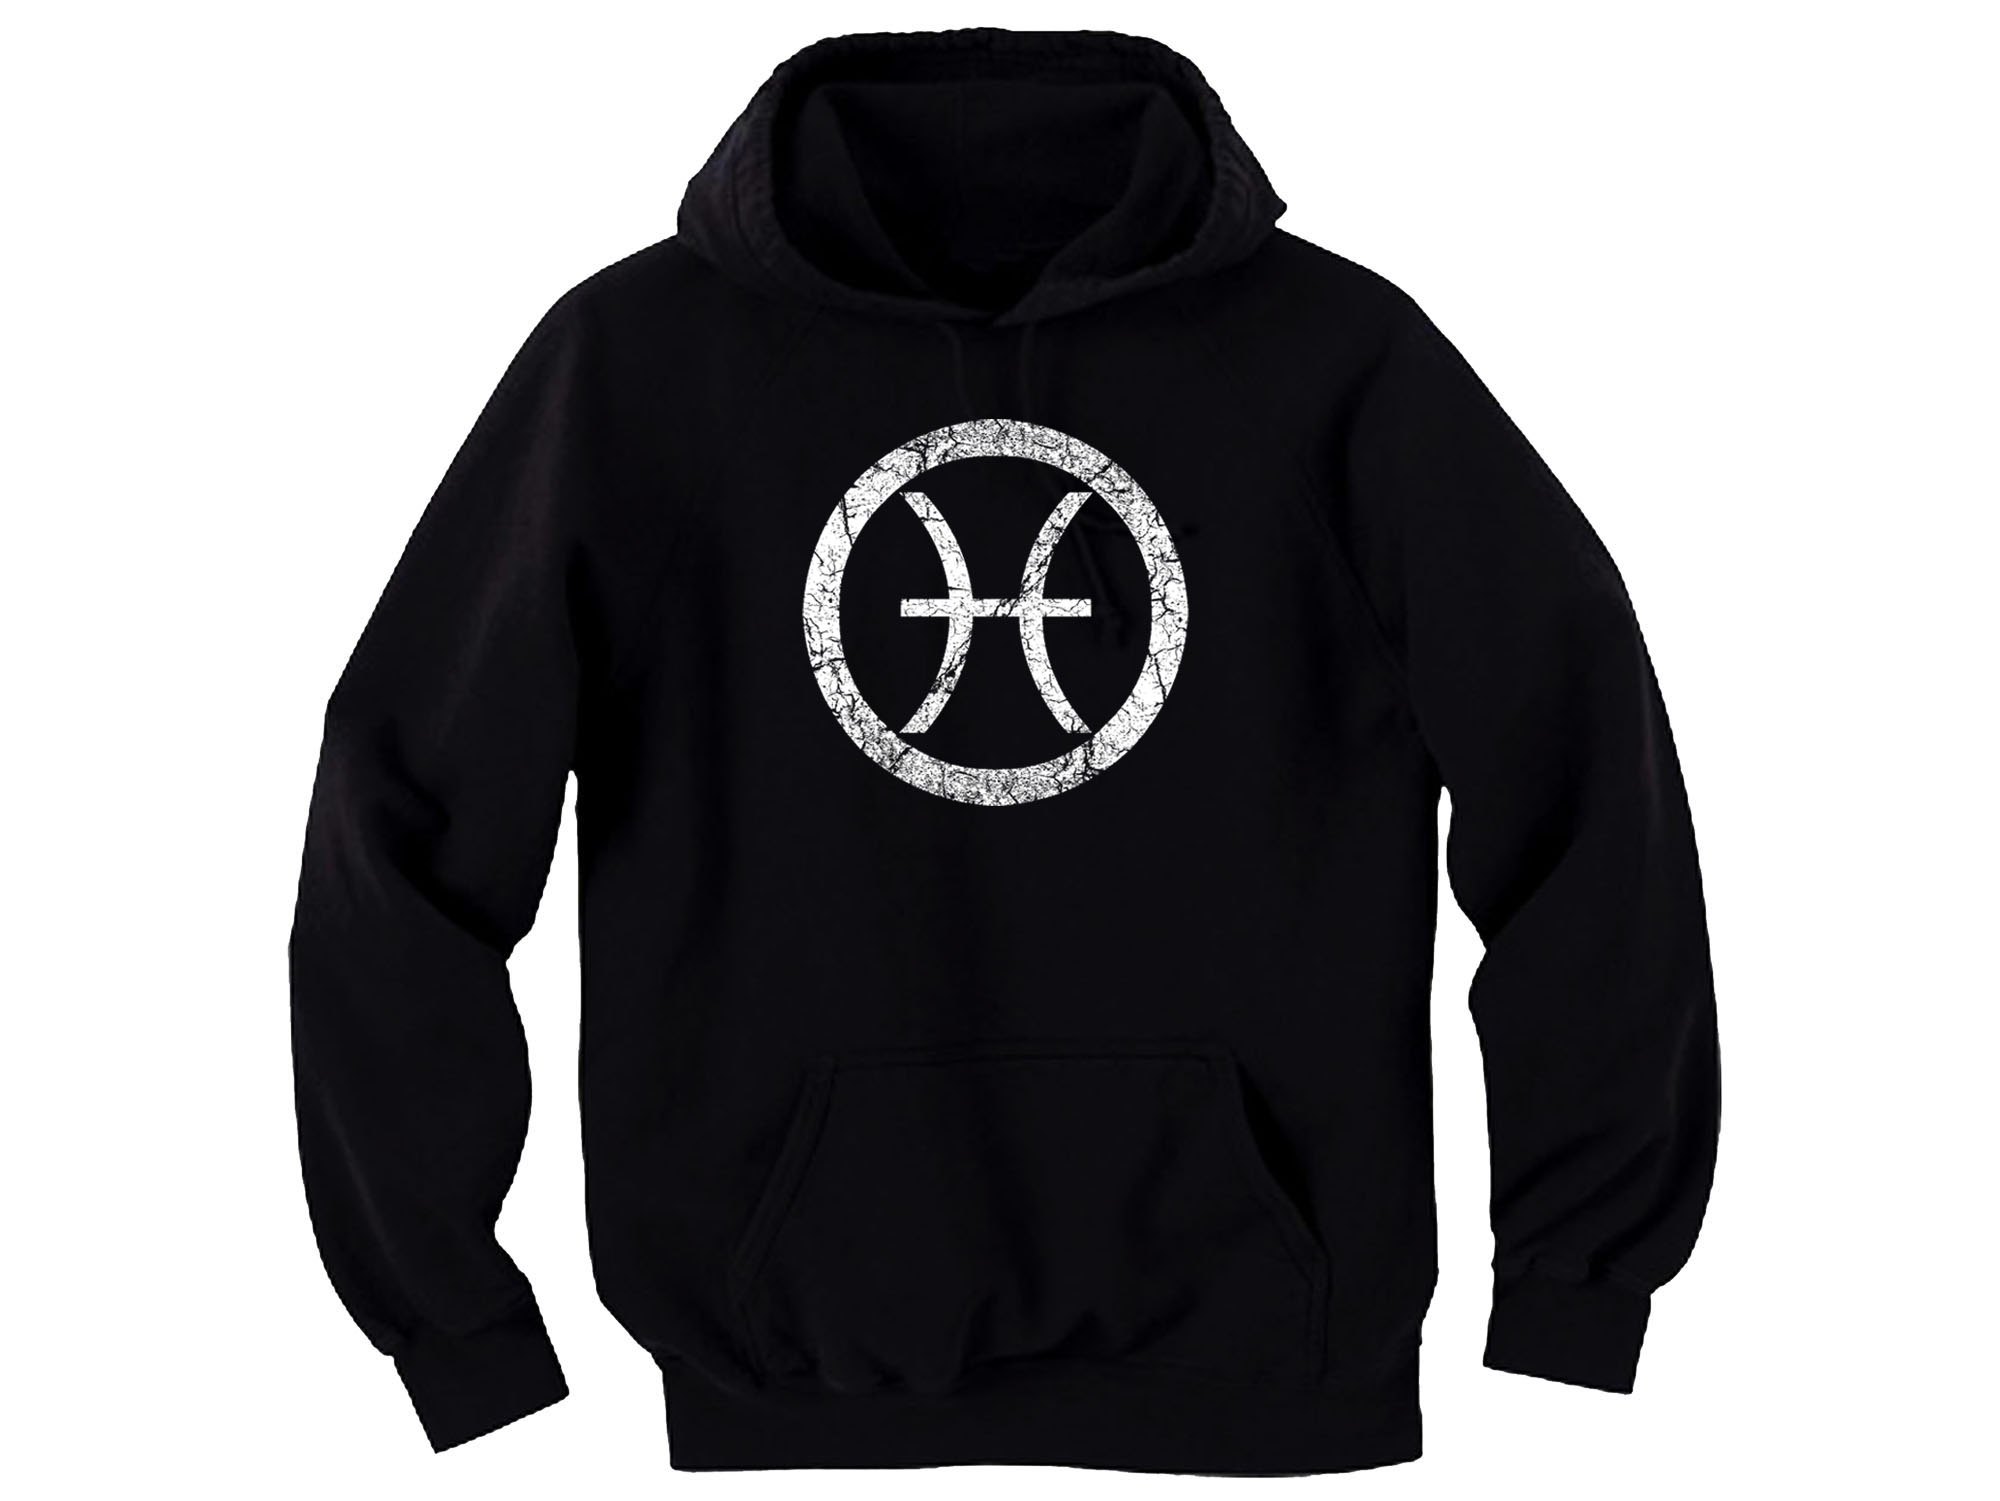 Constellations zodiac stars astrology horoscope Pisces hoodie